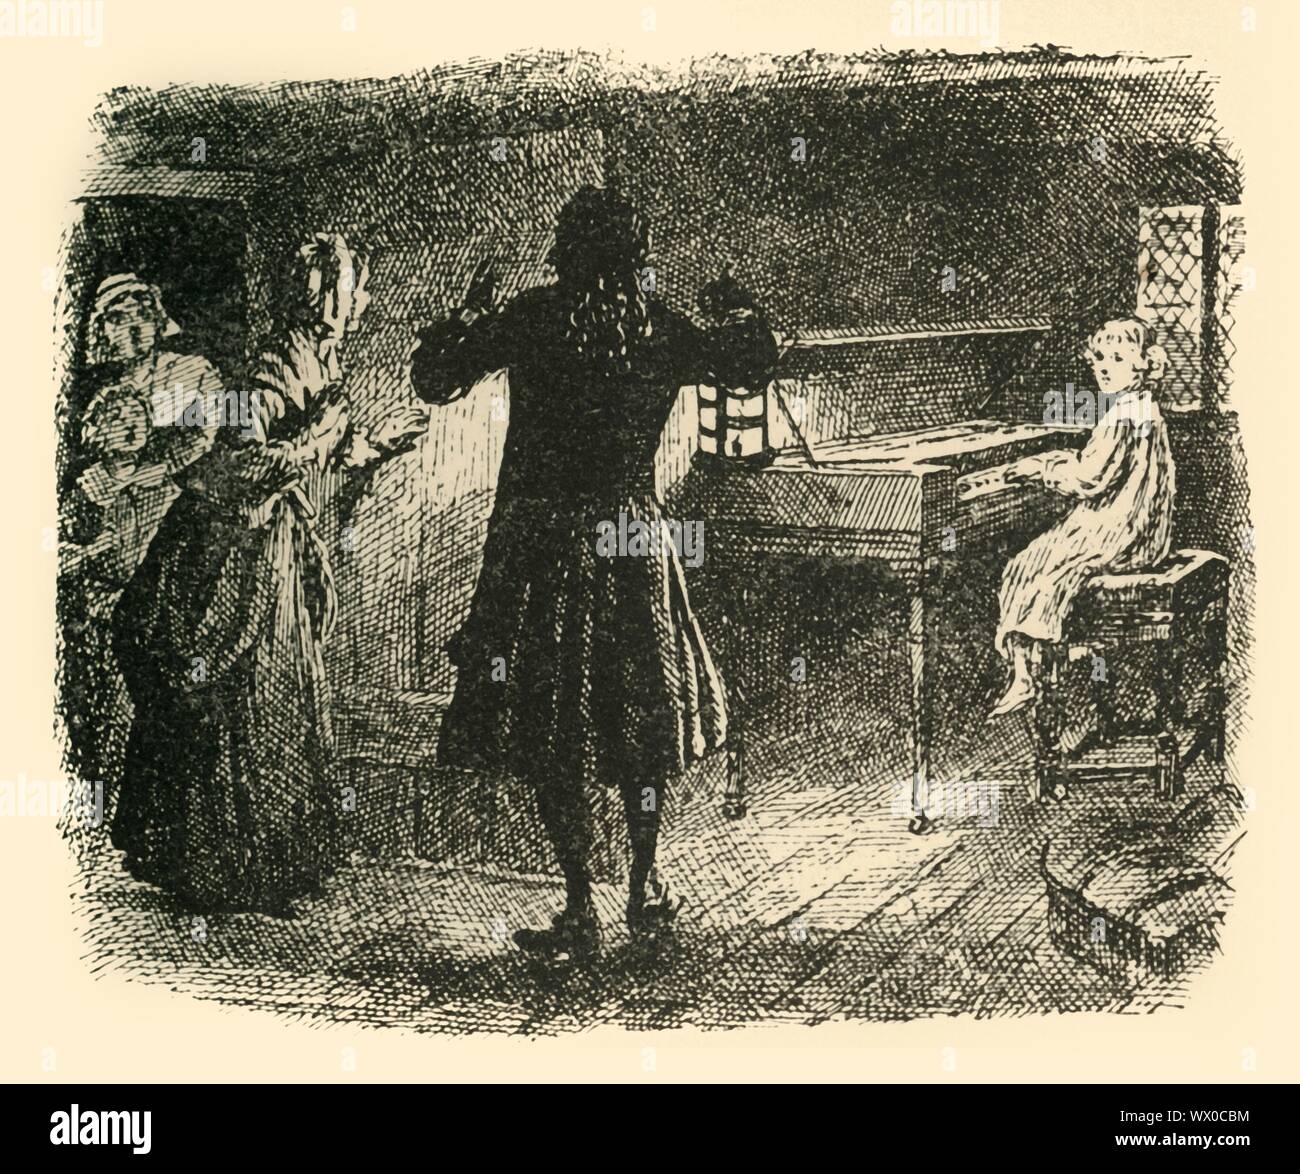 'Beckoned silently to the rest to follow him', (1907). The young Handel is discovered playing the spinet in an attic at night: '....faint musical sounds proceeding from behind the closed door...the master softly lifted the latch, and, having peeped into the room, beckoned silently to the rest to follow him...For there, seated before the spinet, was the white-robed figure of the child, his face half turned towards them, and his eyes, as they caught the light of the lantern, revealing the dreamy, rapt expression of one who is lost to every earthly surrounding.' An episode from the life of German Stock Photo